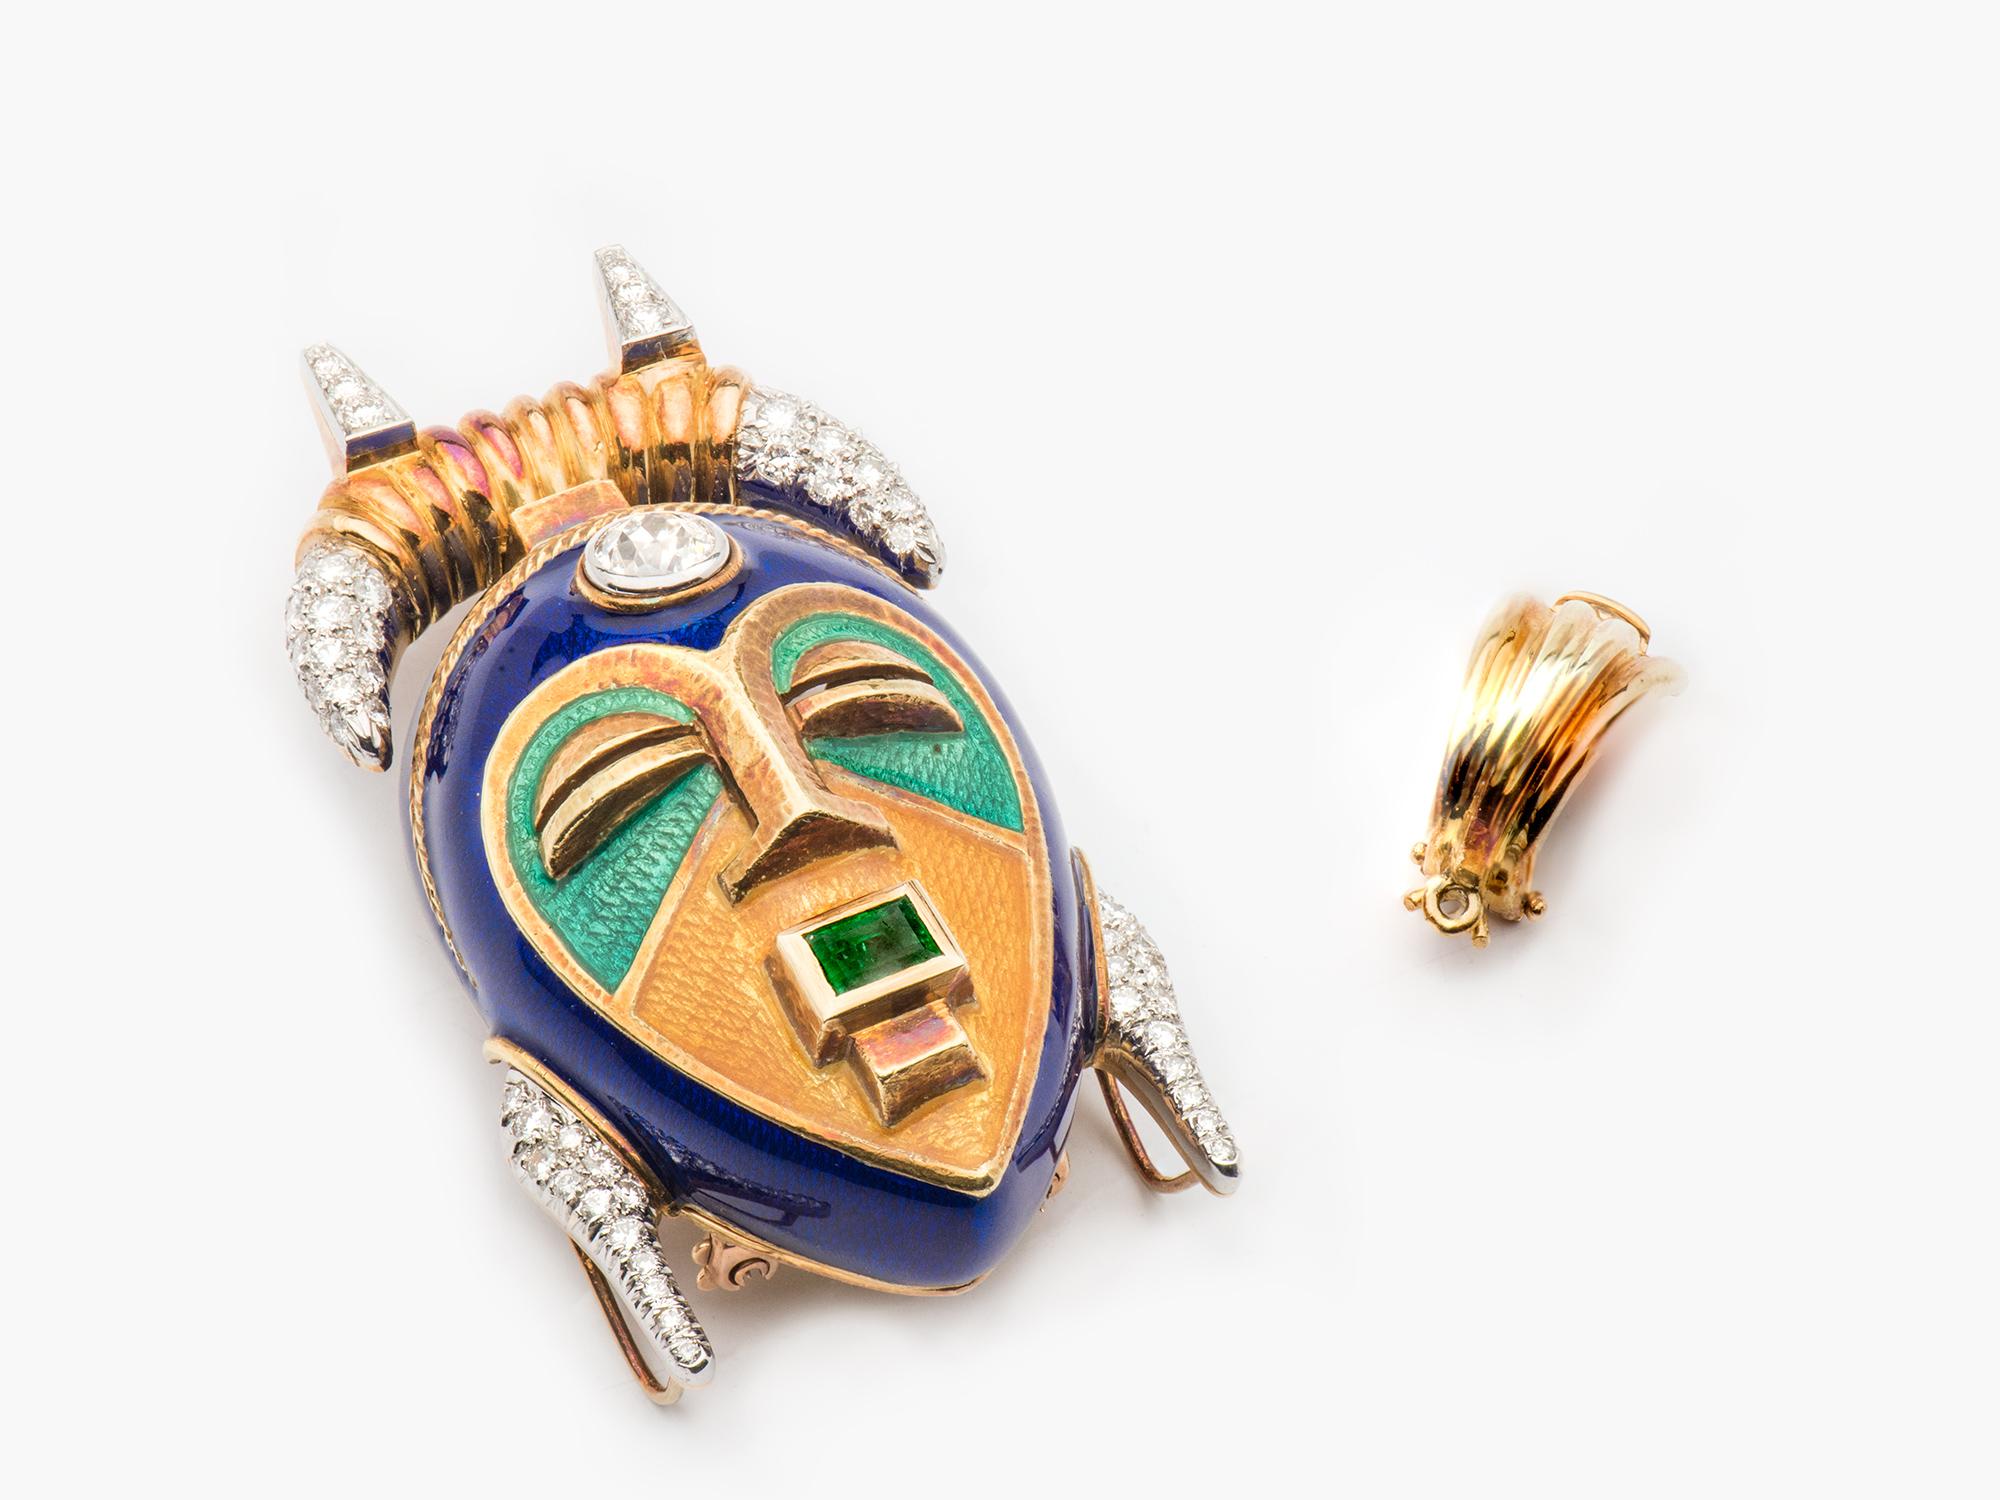 Two Color 18k yellow and white gold Enamel Mask Pendant Clip Brooch with approximately 2 cts of Diamonds and Emerald accents. The bezel is 1/2